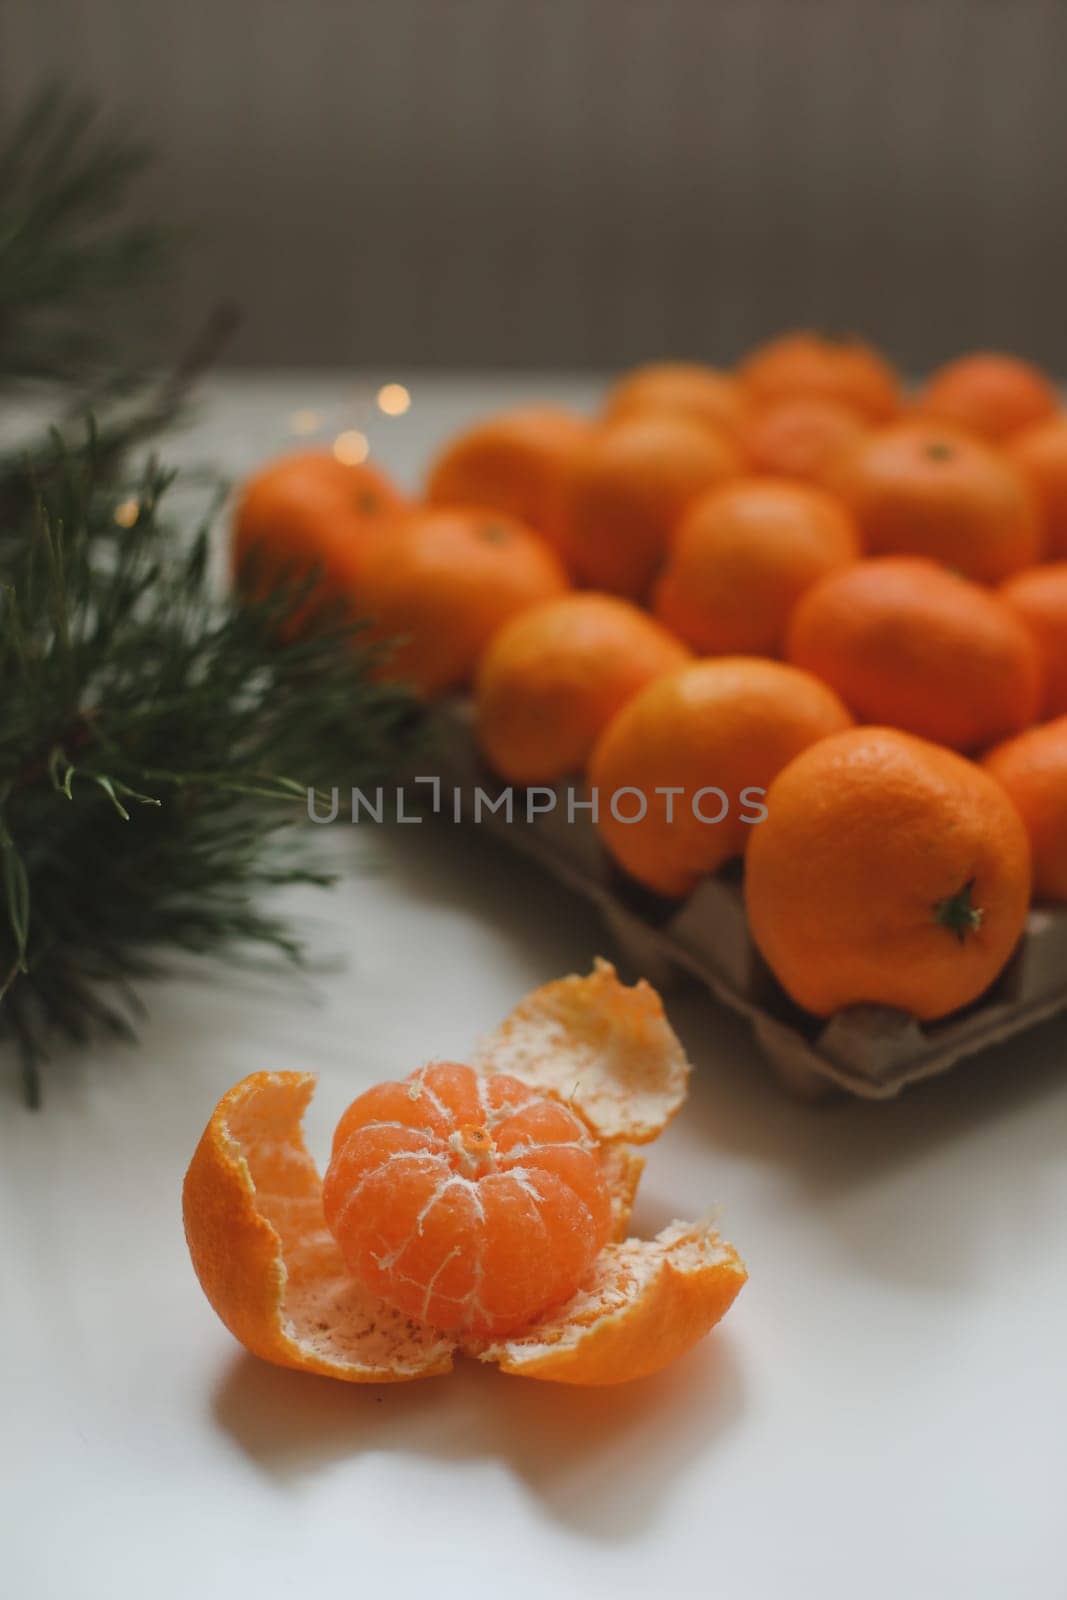 Christmas background with fir tree branches and tangerines. Merry Christmas and Happy New Year Greeting Card. Copy space. Top view. High quality photo